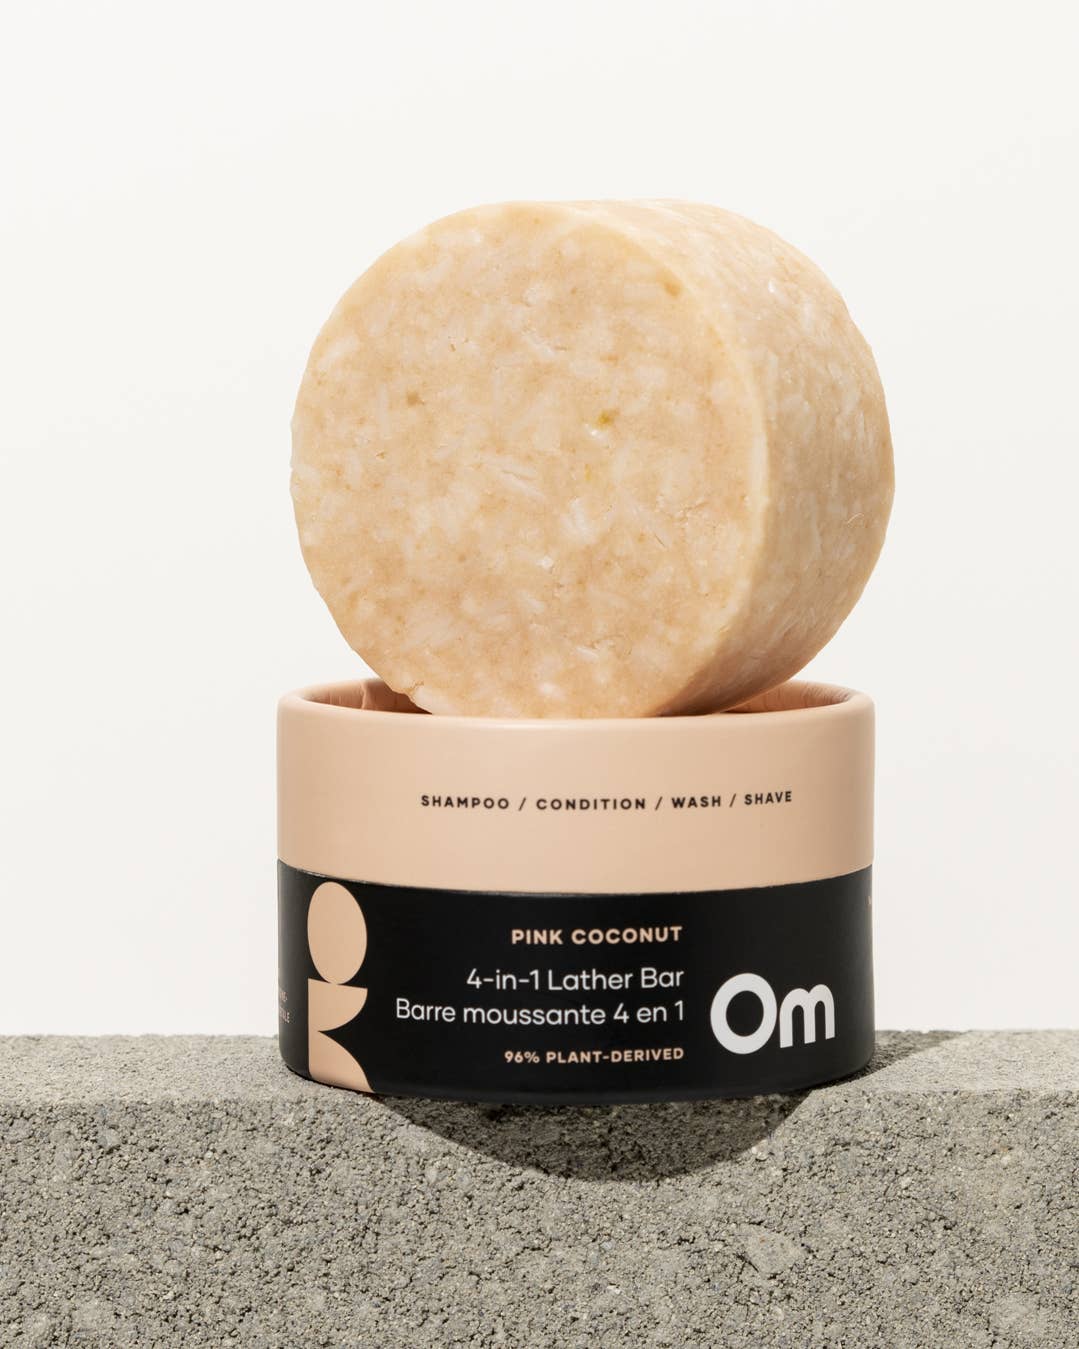 Pink Coconut 4-in-1 Lather Bar- OM Skincare